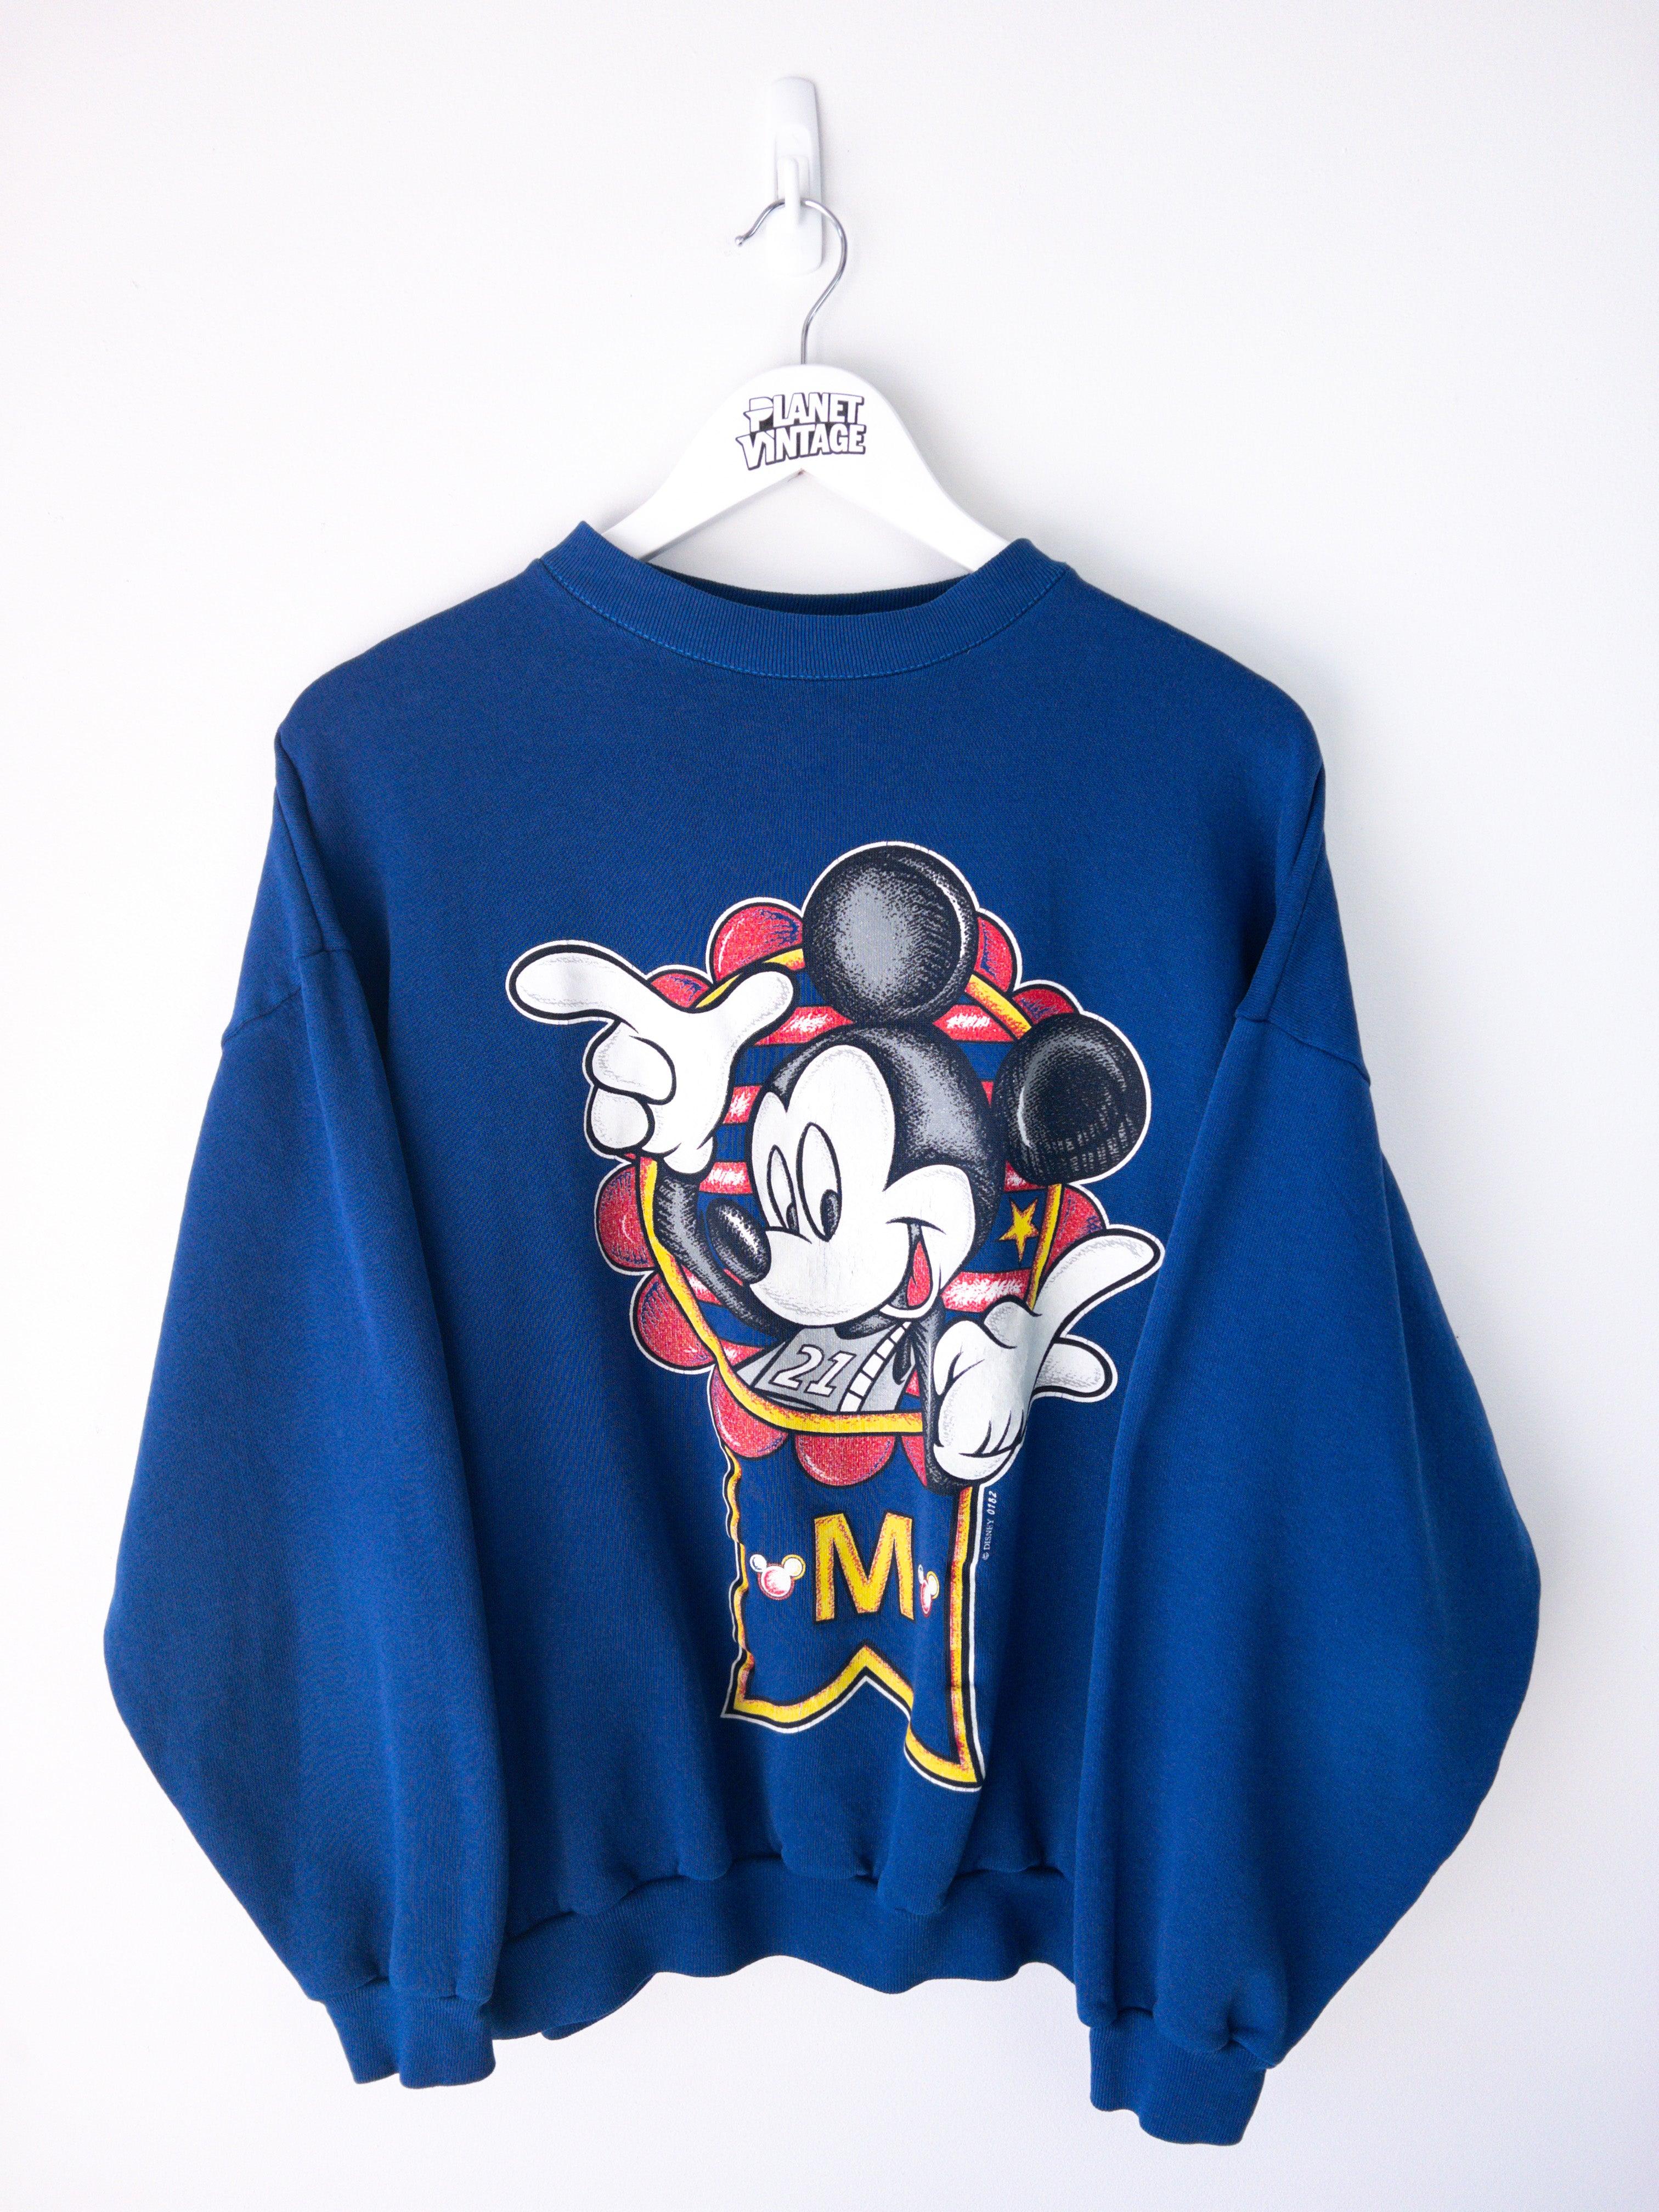 Mickey Mouse '90s Sweatshirt (M) - Planet Vintage Store